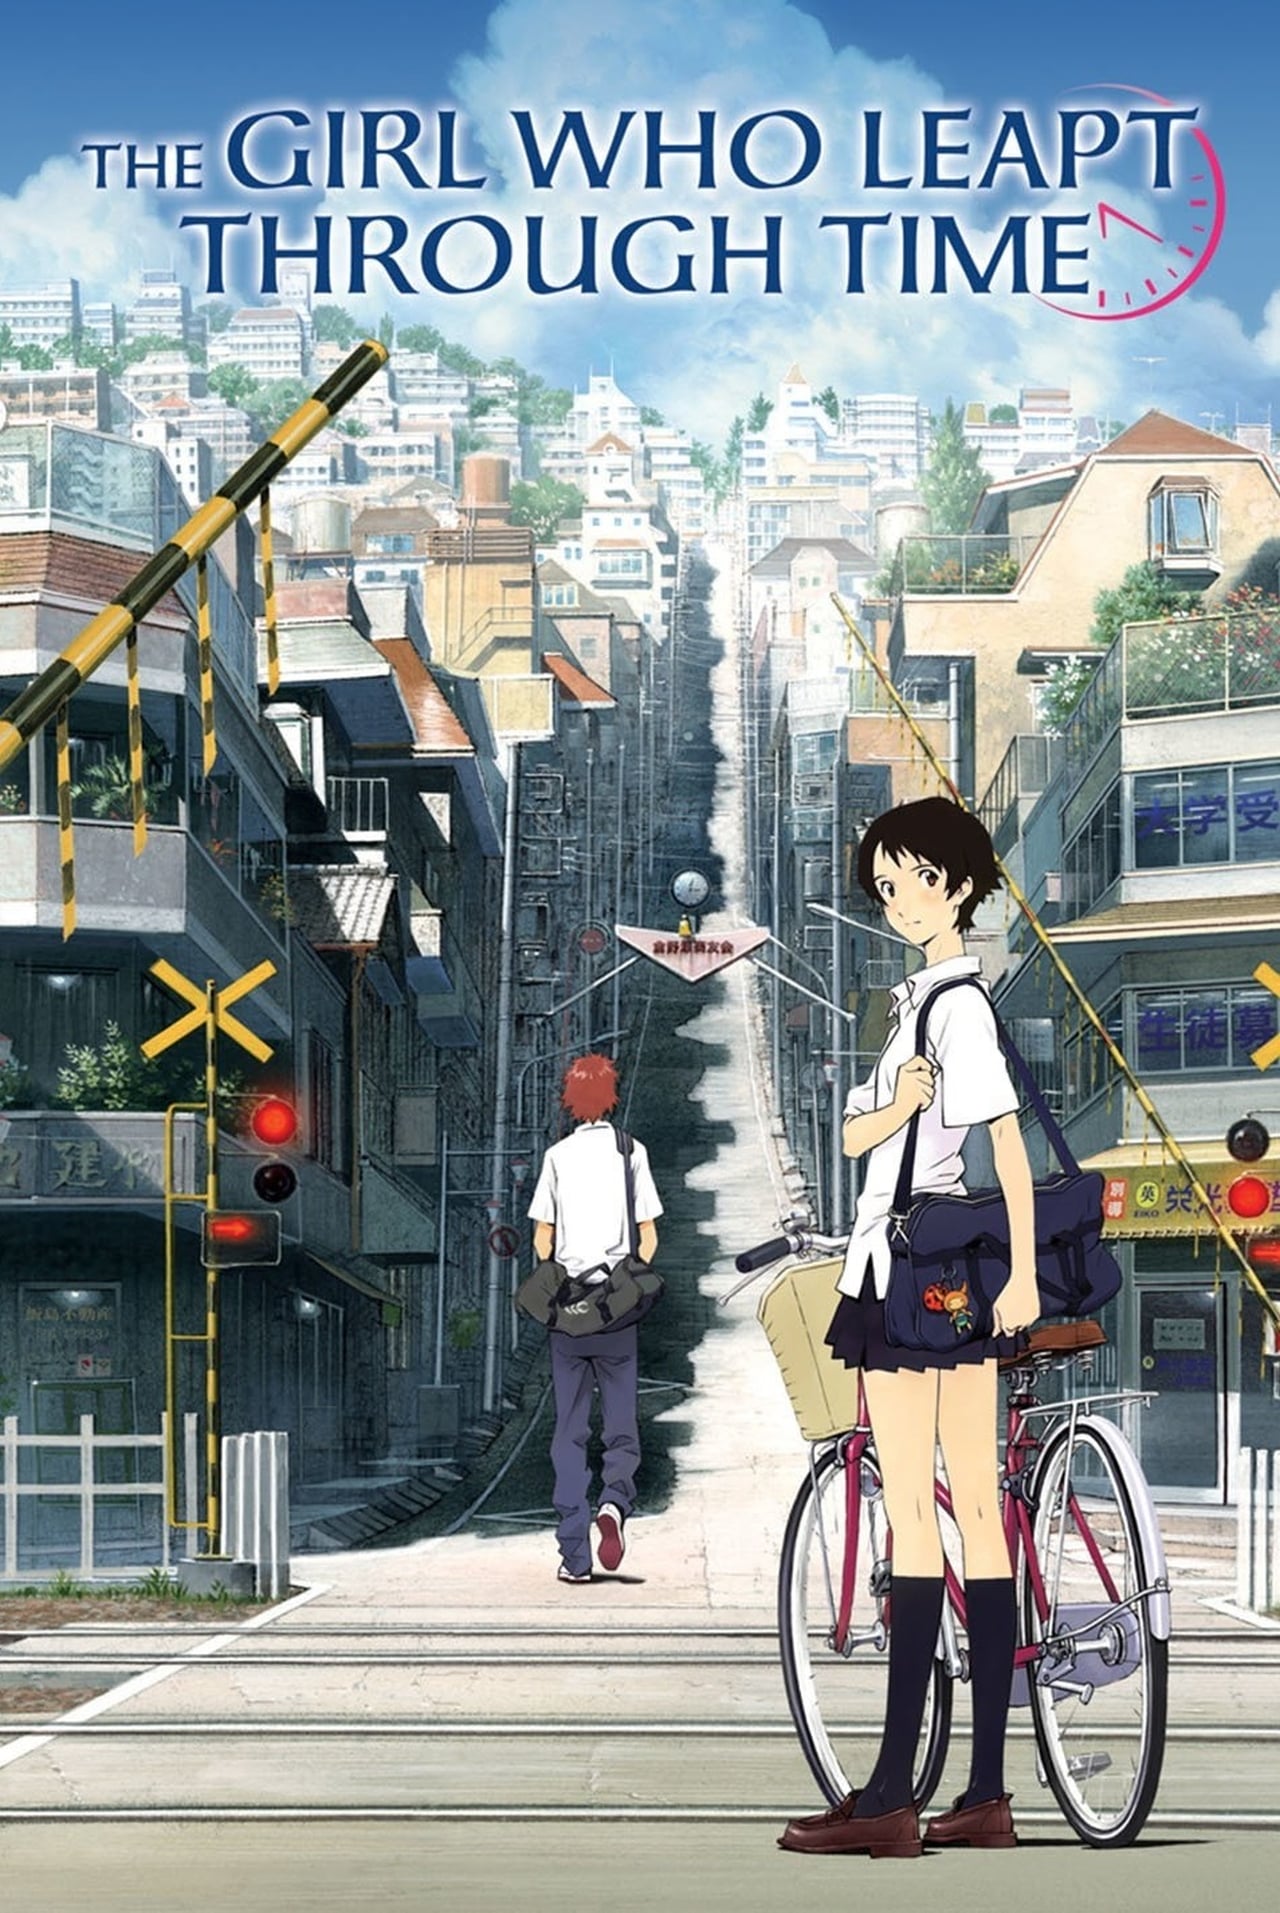 The Girl Who Leapt Through Time (2007)